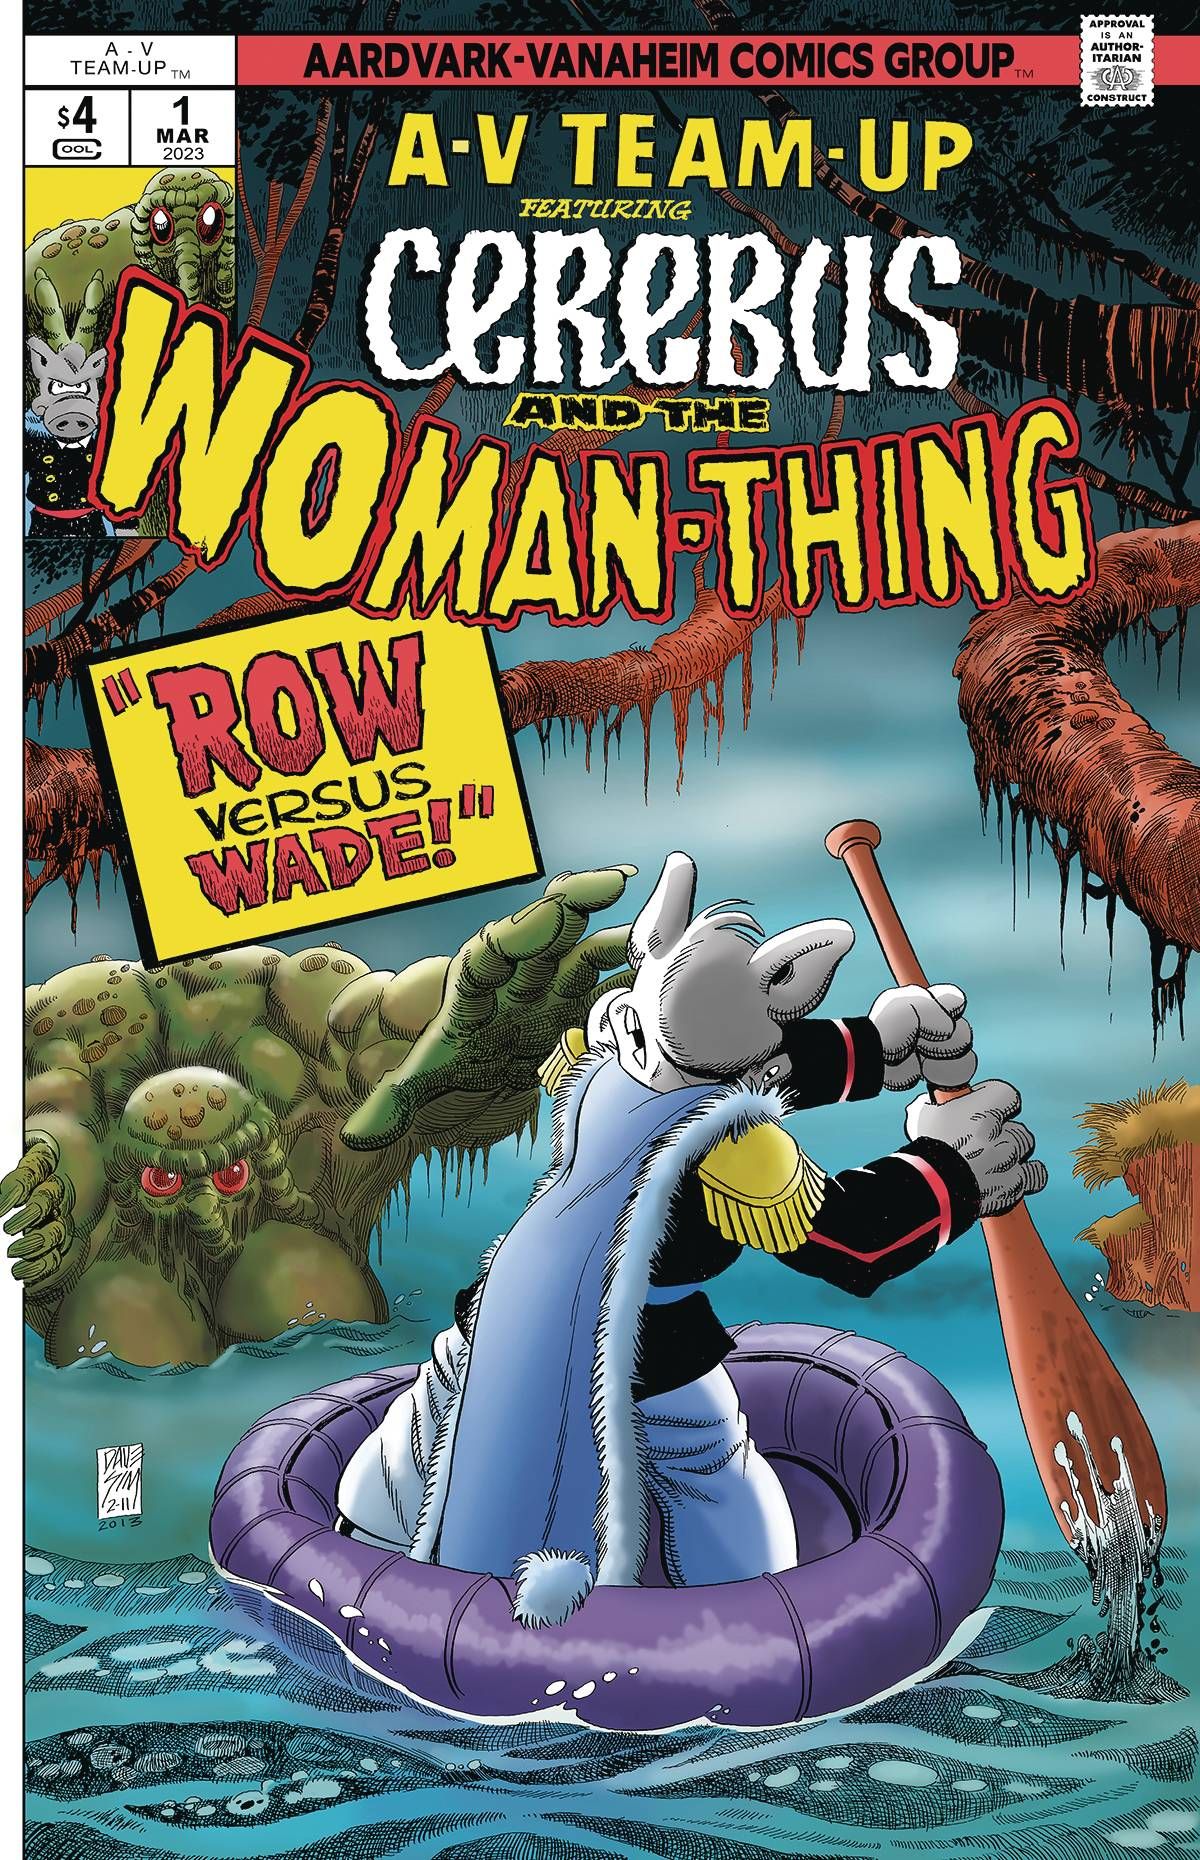 A-V Team-Up: Cerebus and the Woman-Thing Comic